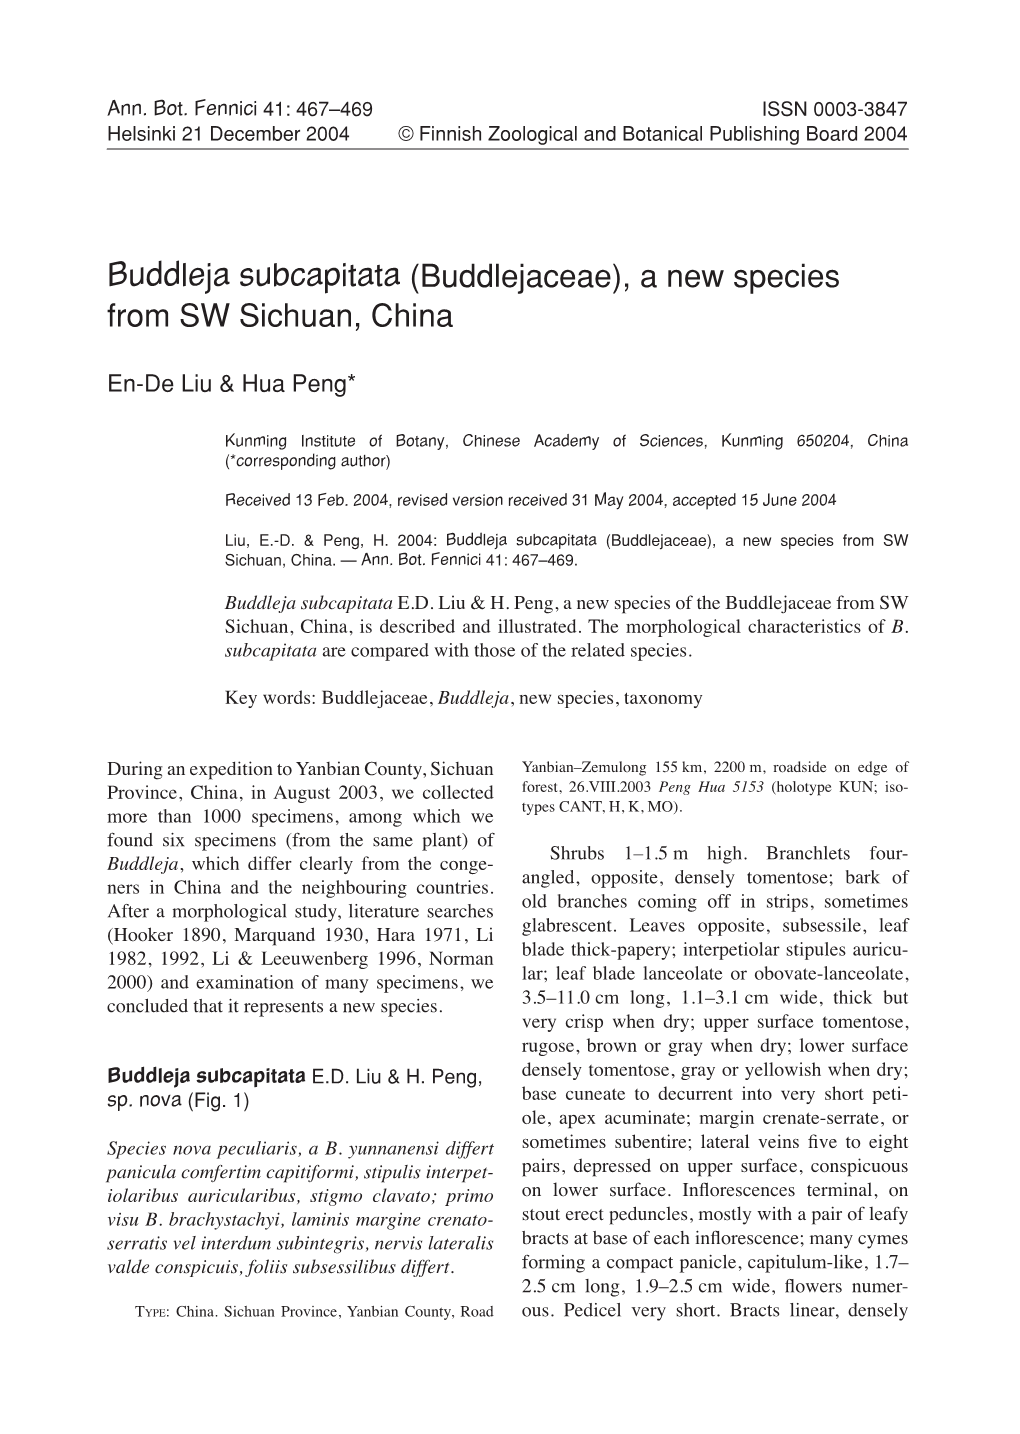 Buddleja Subcapitata (Buddlejaceae), a New Species from SW Sichuan, China